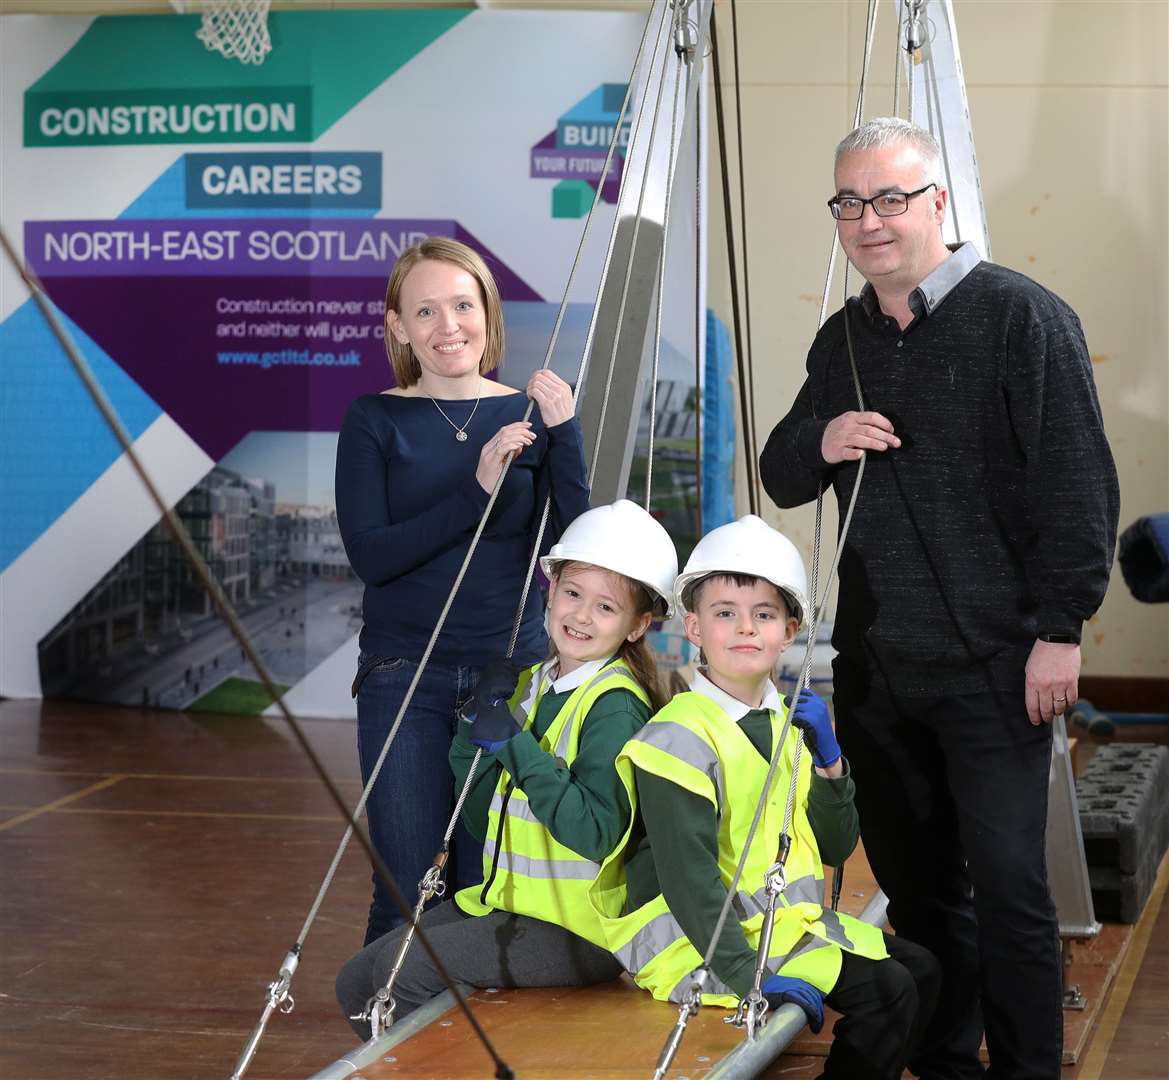 Schools in Aberdeenshire can get involved with a new challenge that promotes opportunities in the construction sector.